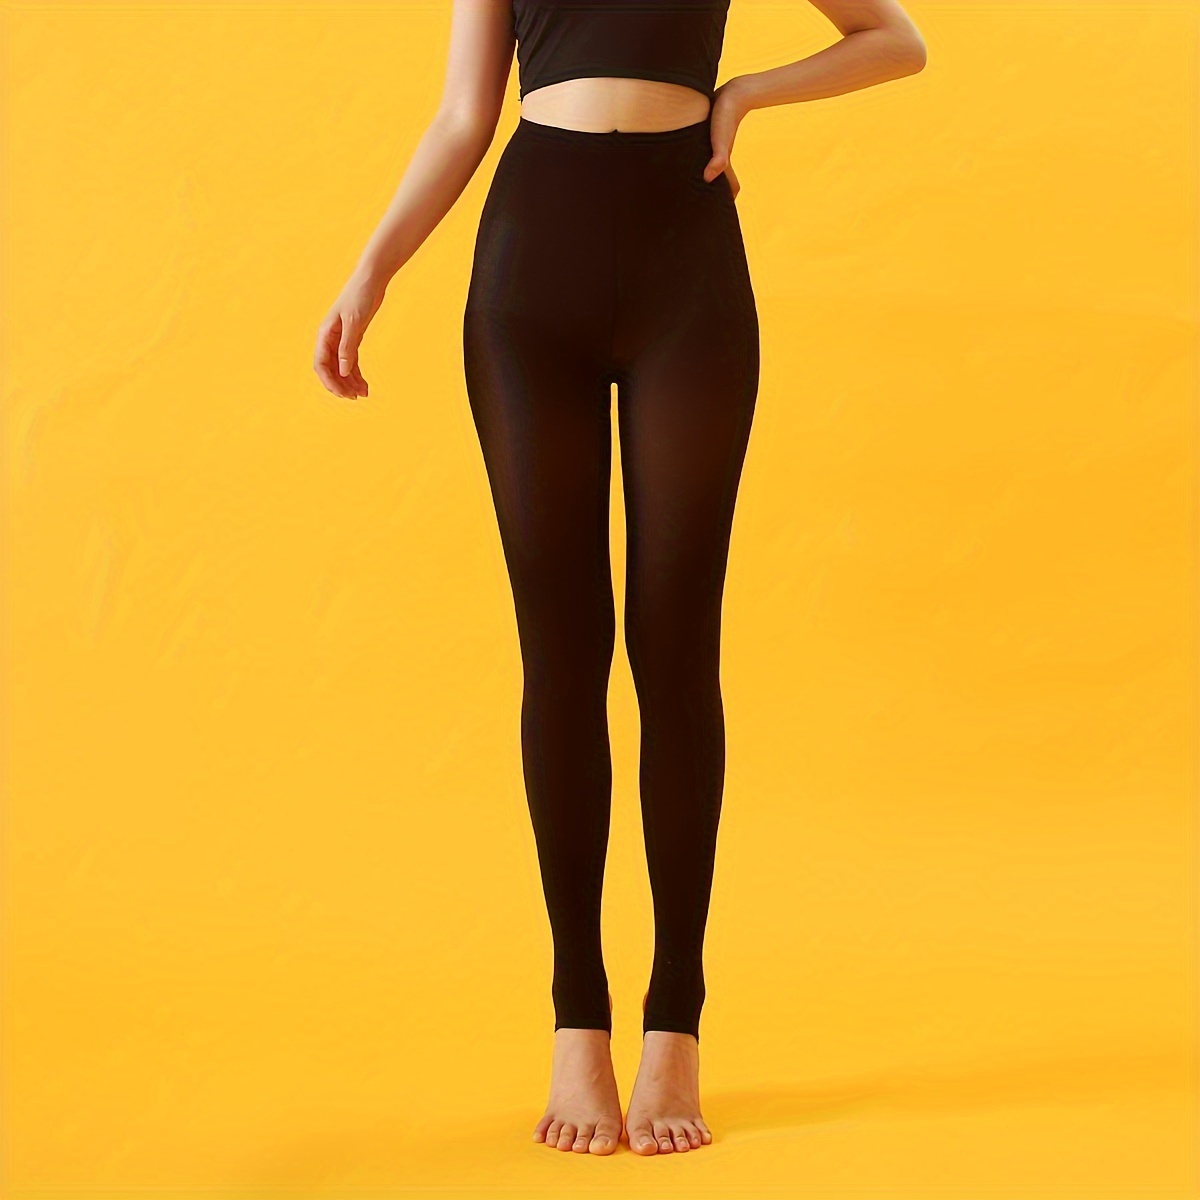 Women's Glossy Oil Bottoms Footless Tights Semi-Transparent Yoga Skinny  Pants 